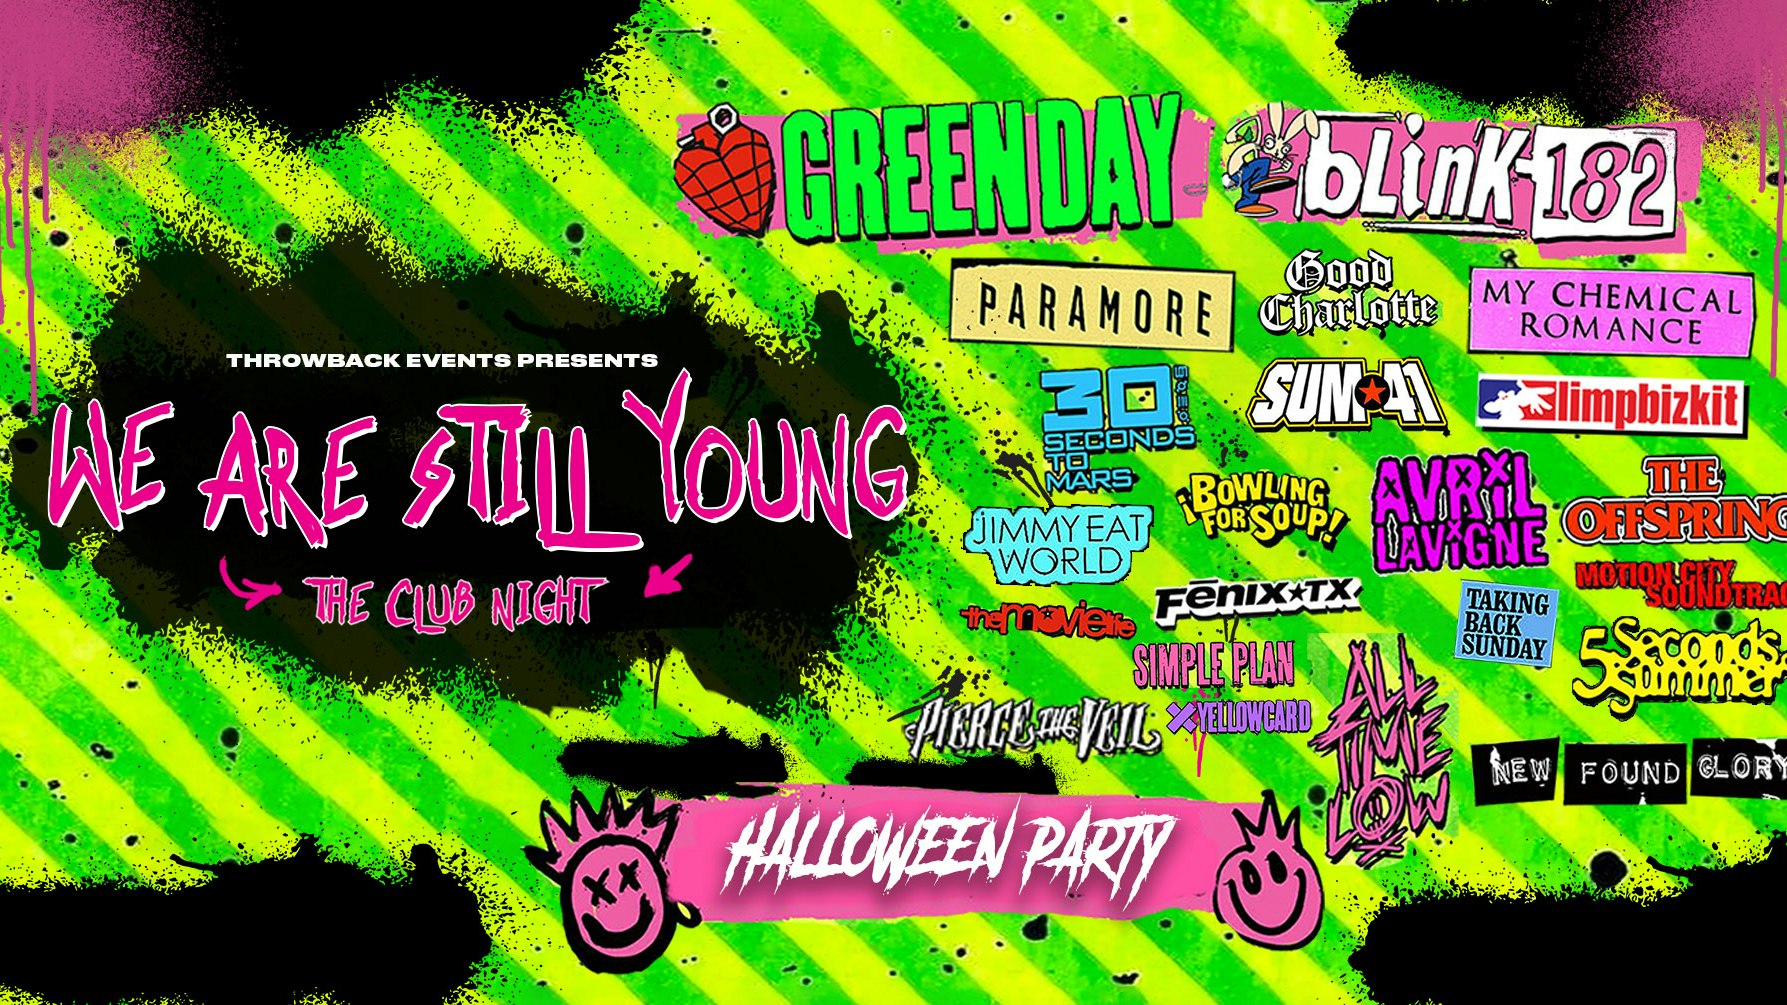 We Are Still Young Halloween Party (Manchester)